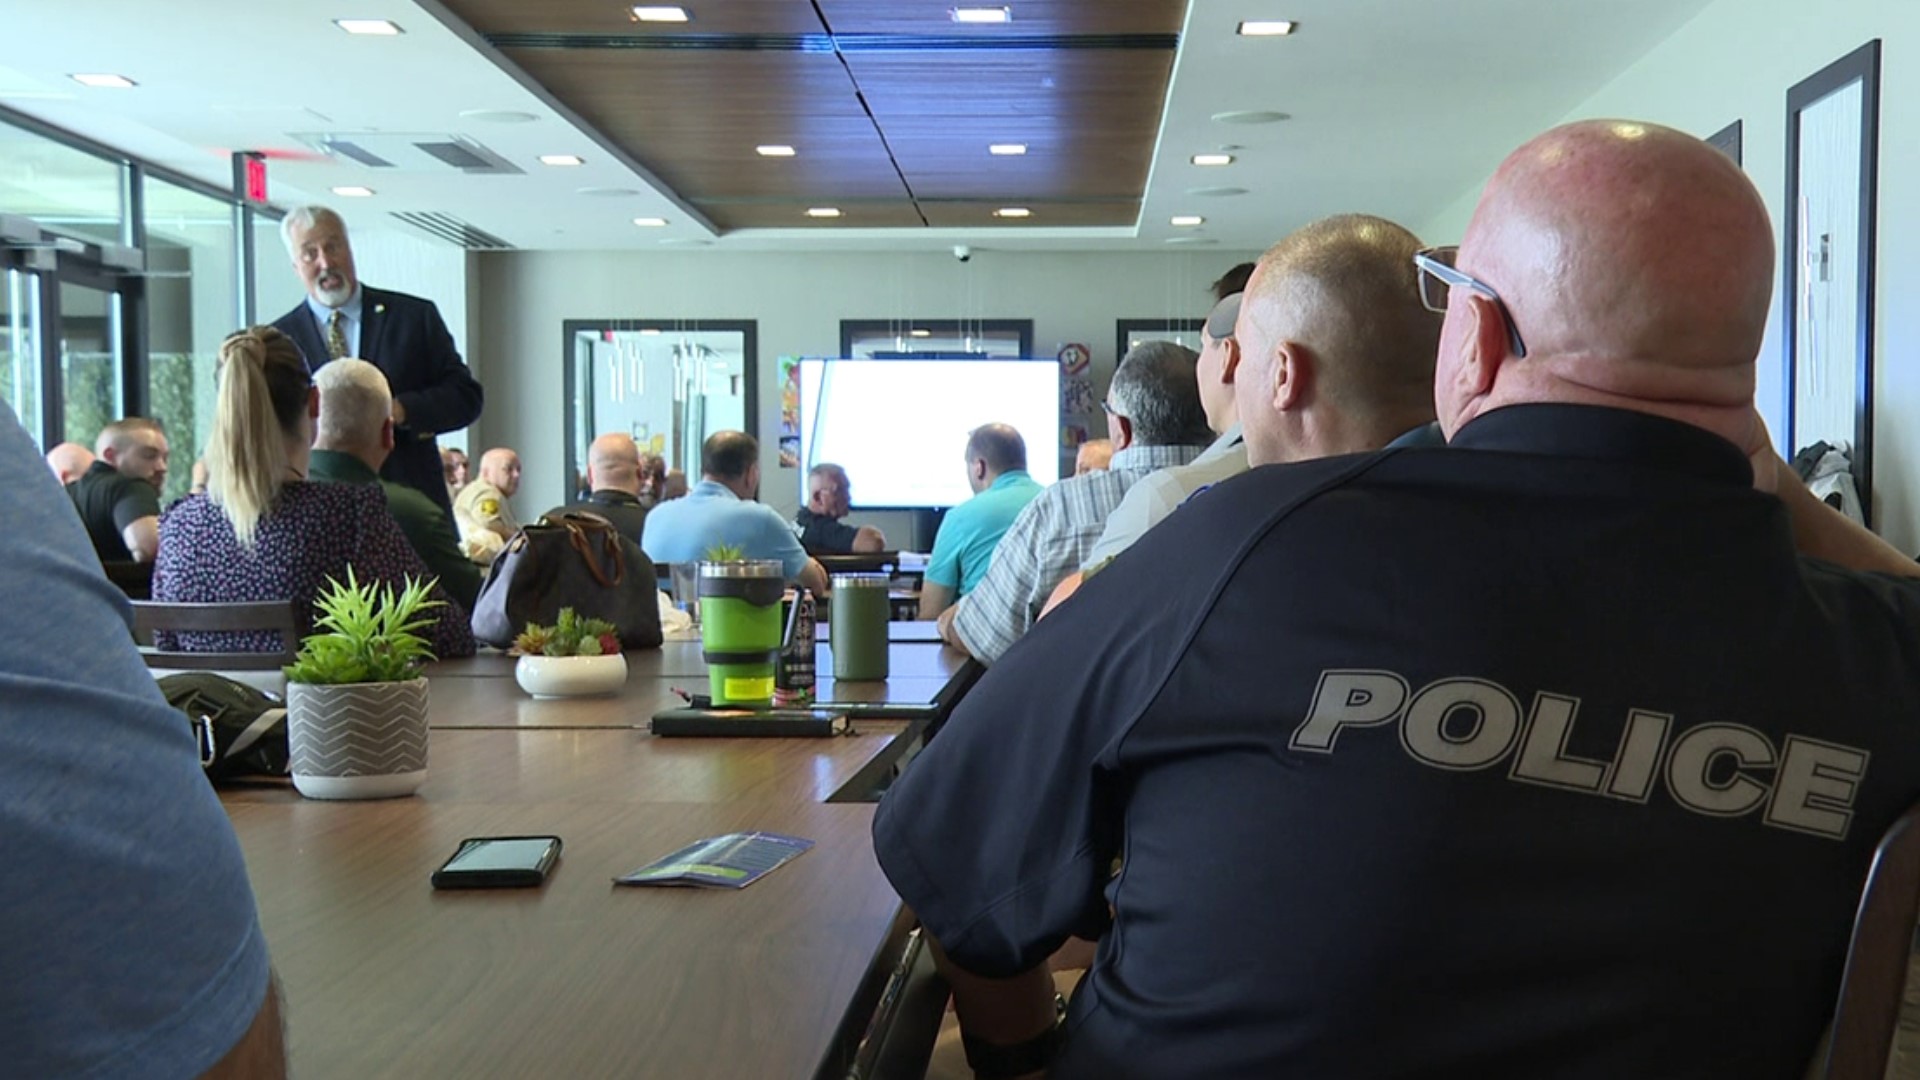 First responders in our area are now more prepared when it comes to interacting with people who have autism during emergencies.